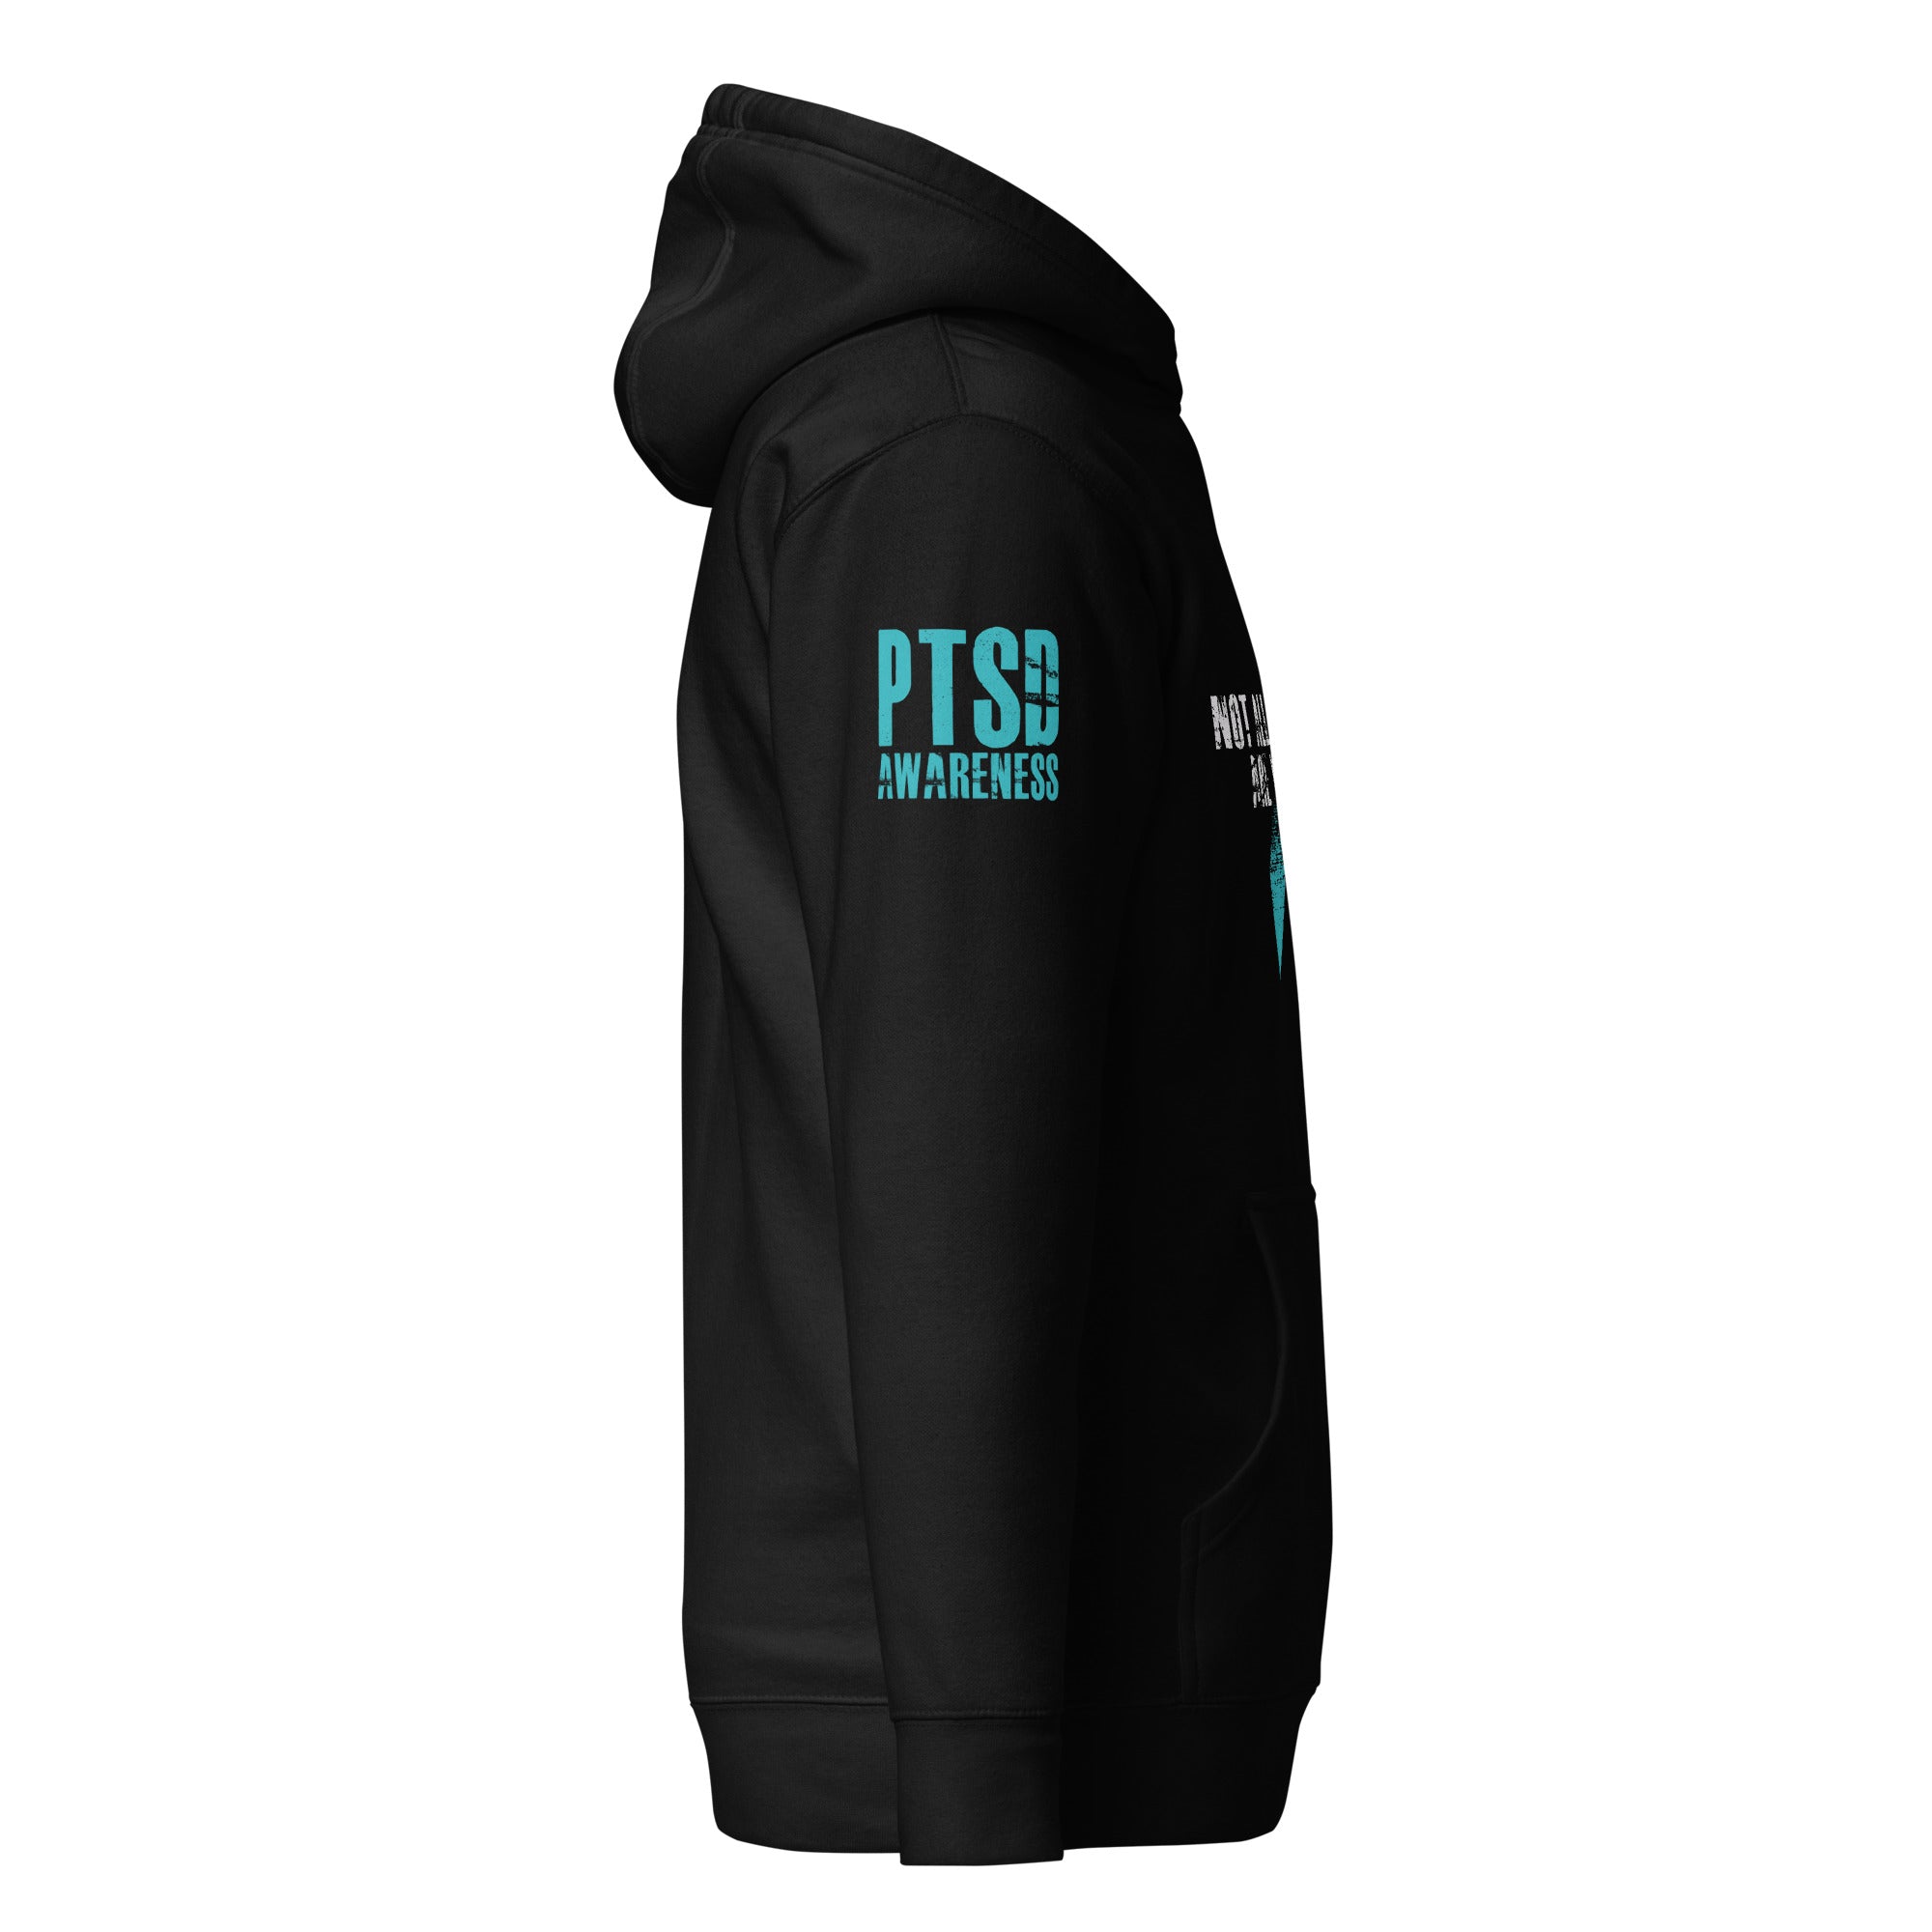 PTSD Not All Wounds Hoodie-Premium Hoodie-Ardent Patriot Apparel Co.